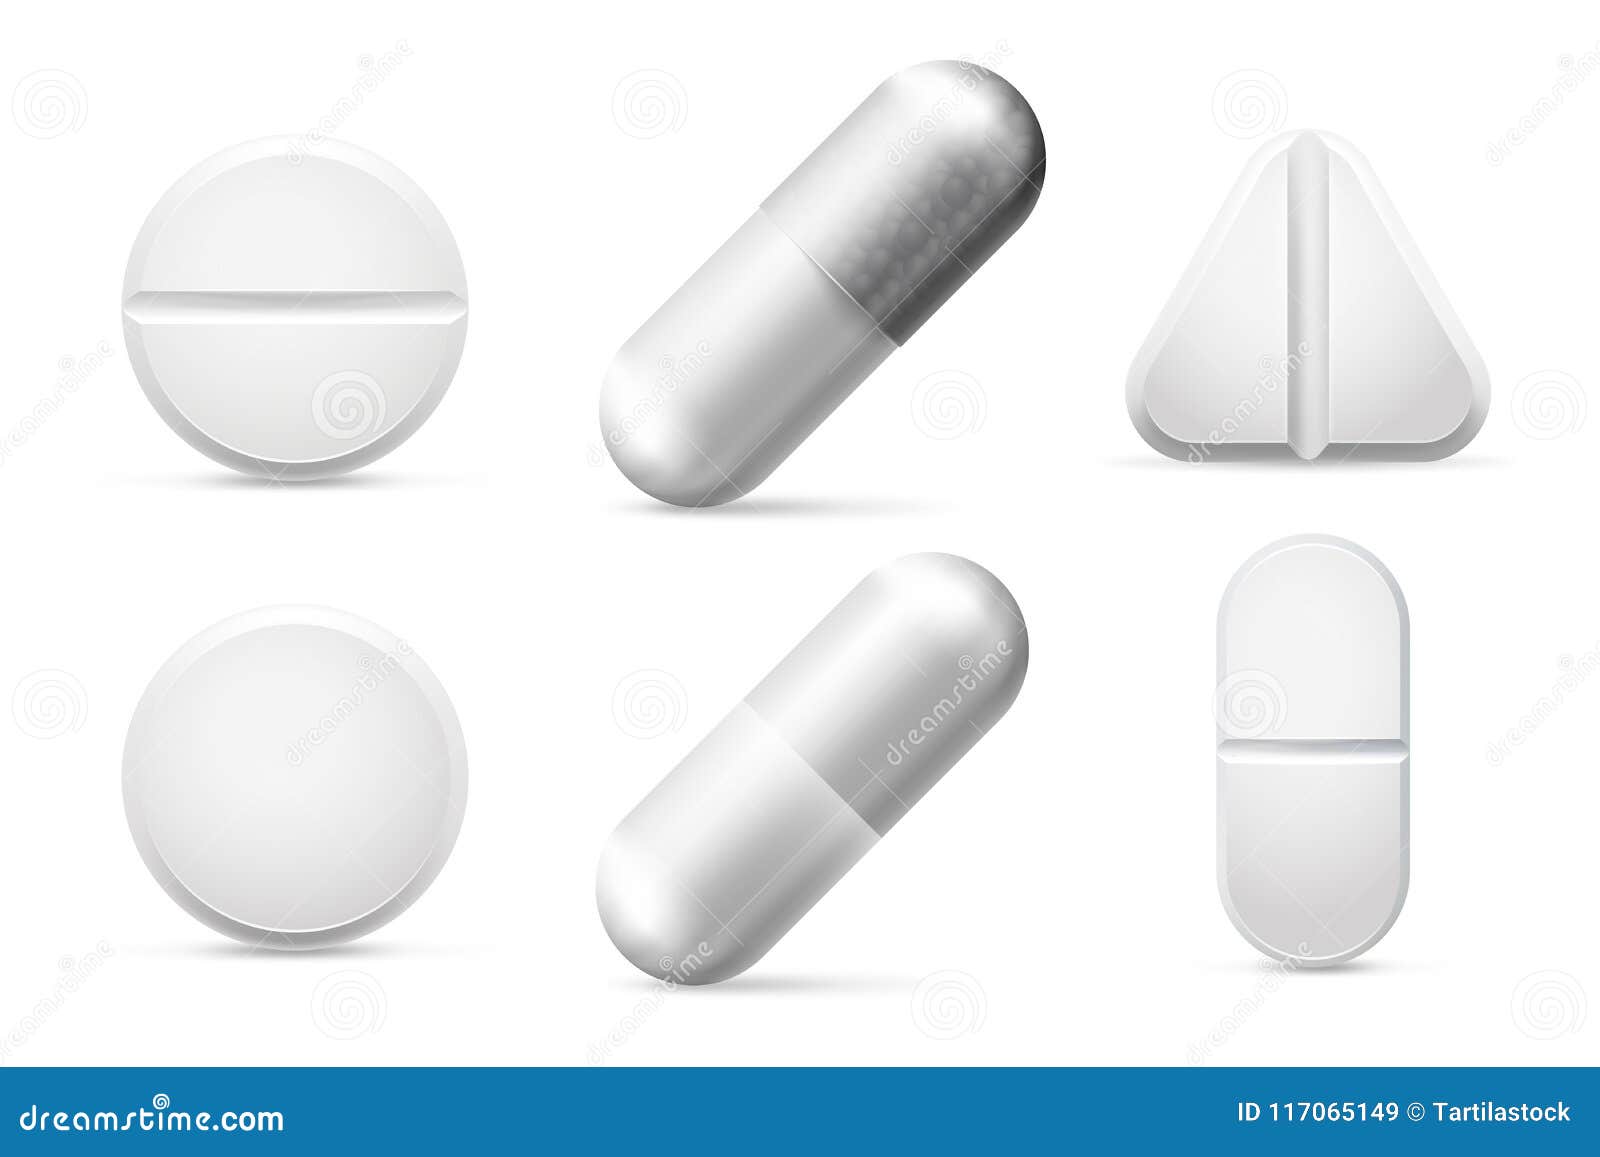 round white cure pills, aspirin, antibiotics and painkiller drugs. pain treatment pill and pharmaceutical drug 